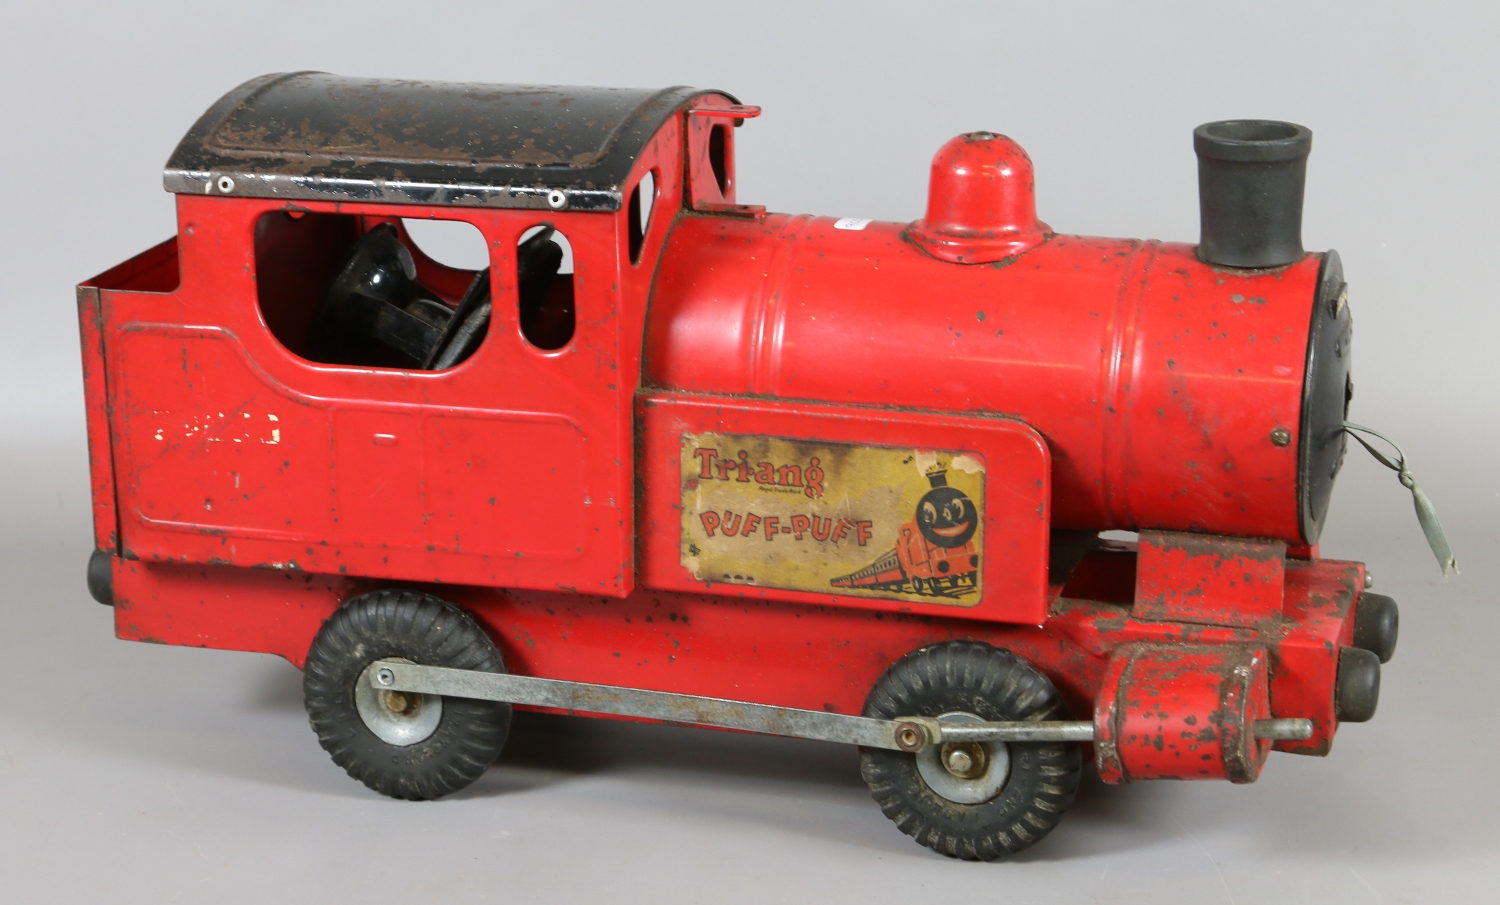 A childs tinplate Triang Puff Puff engine.